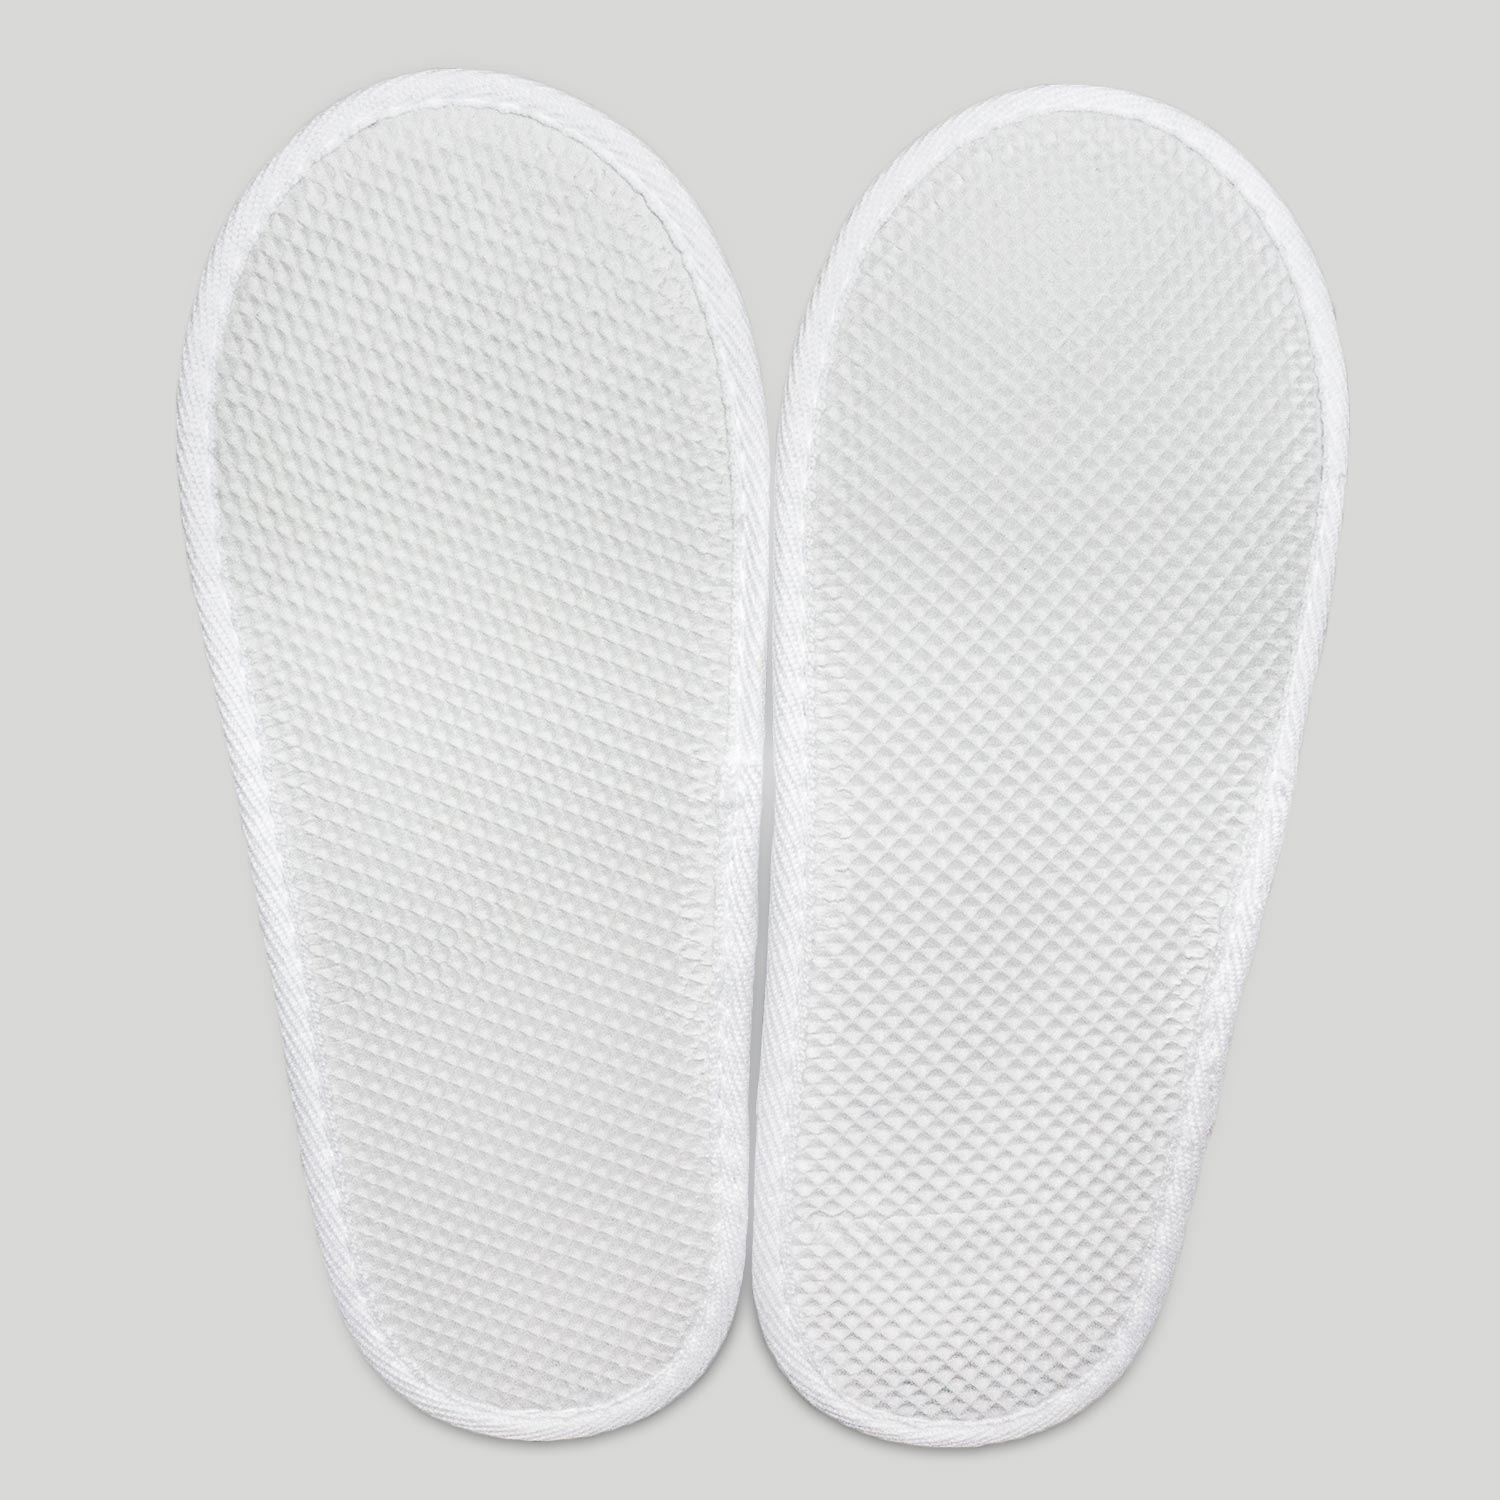 Accessories :: Hotel and Spa Slippers :: White Closed Toe Kids Velour ...